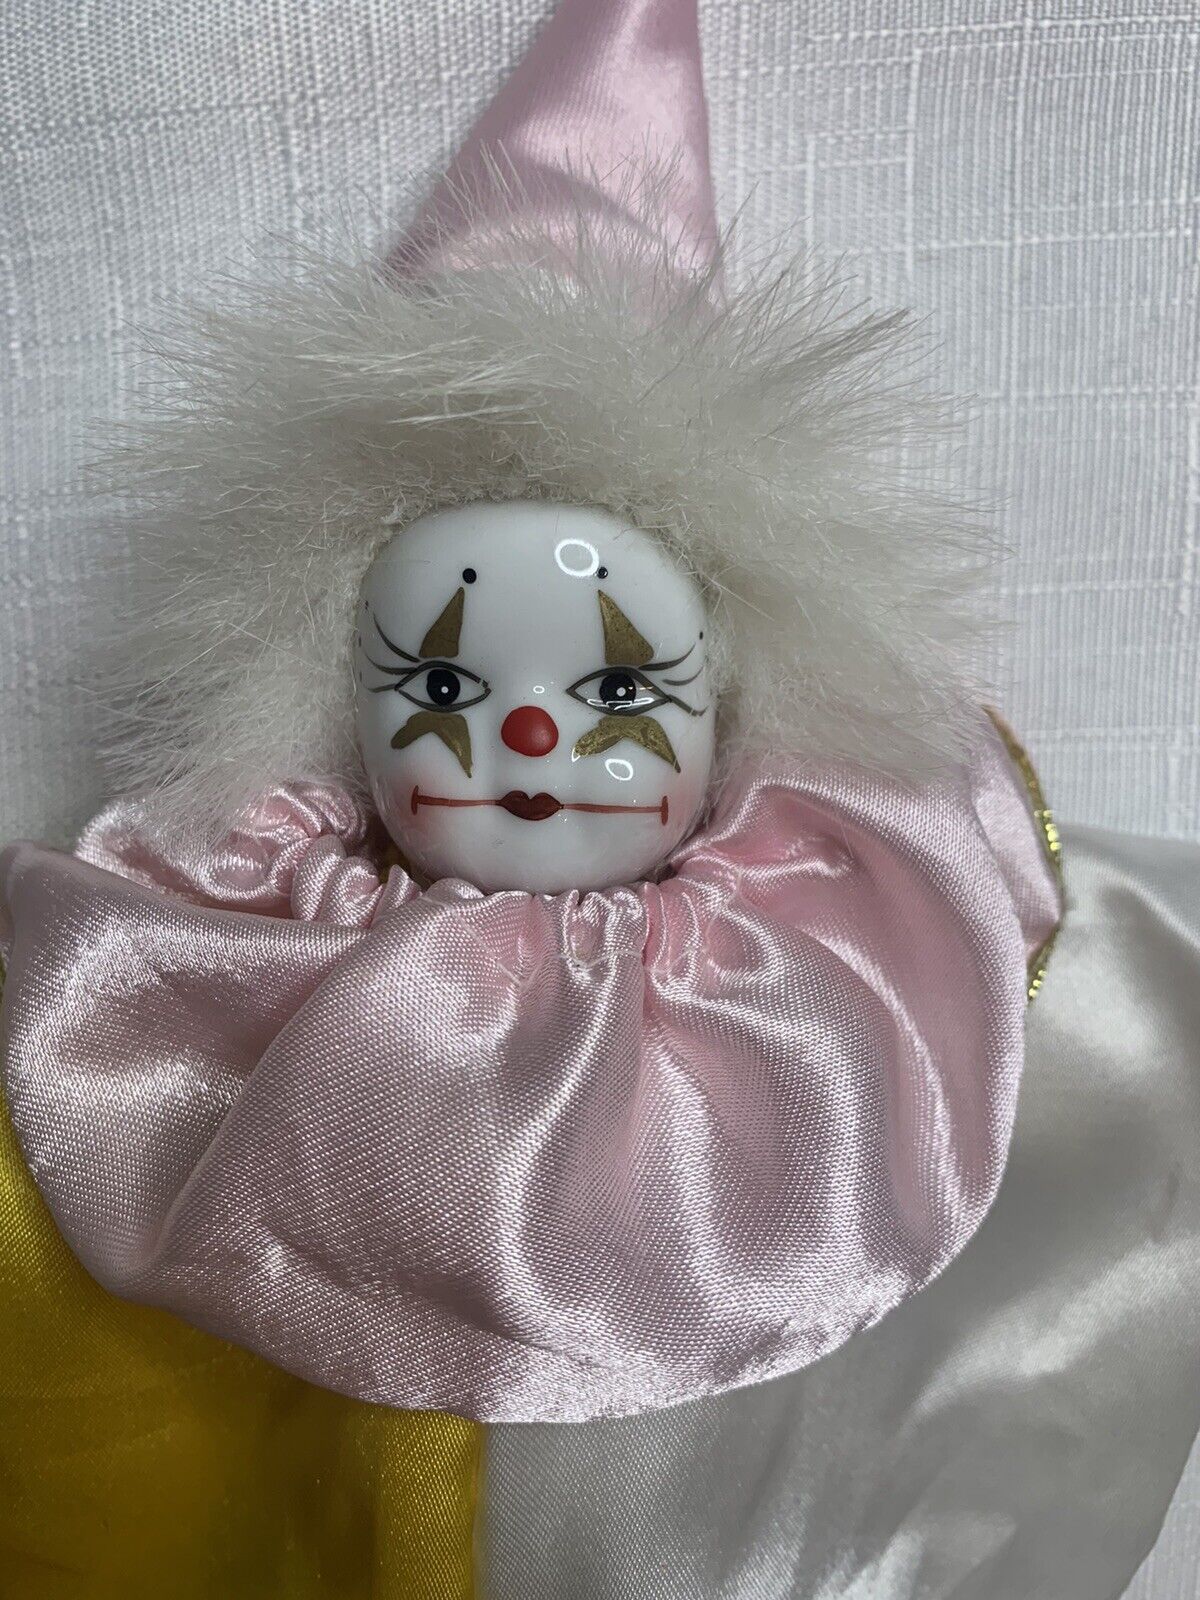 Vintage Ceramic Porcelain Clown Doll Figurine Collectible Pink and Yellow